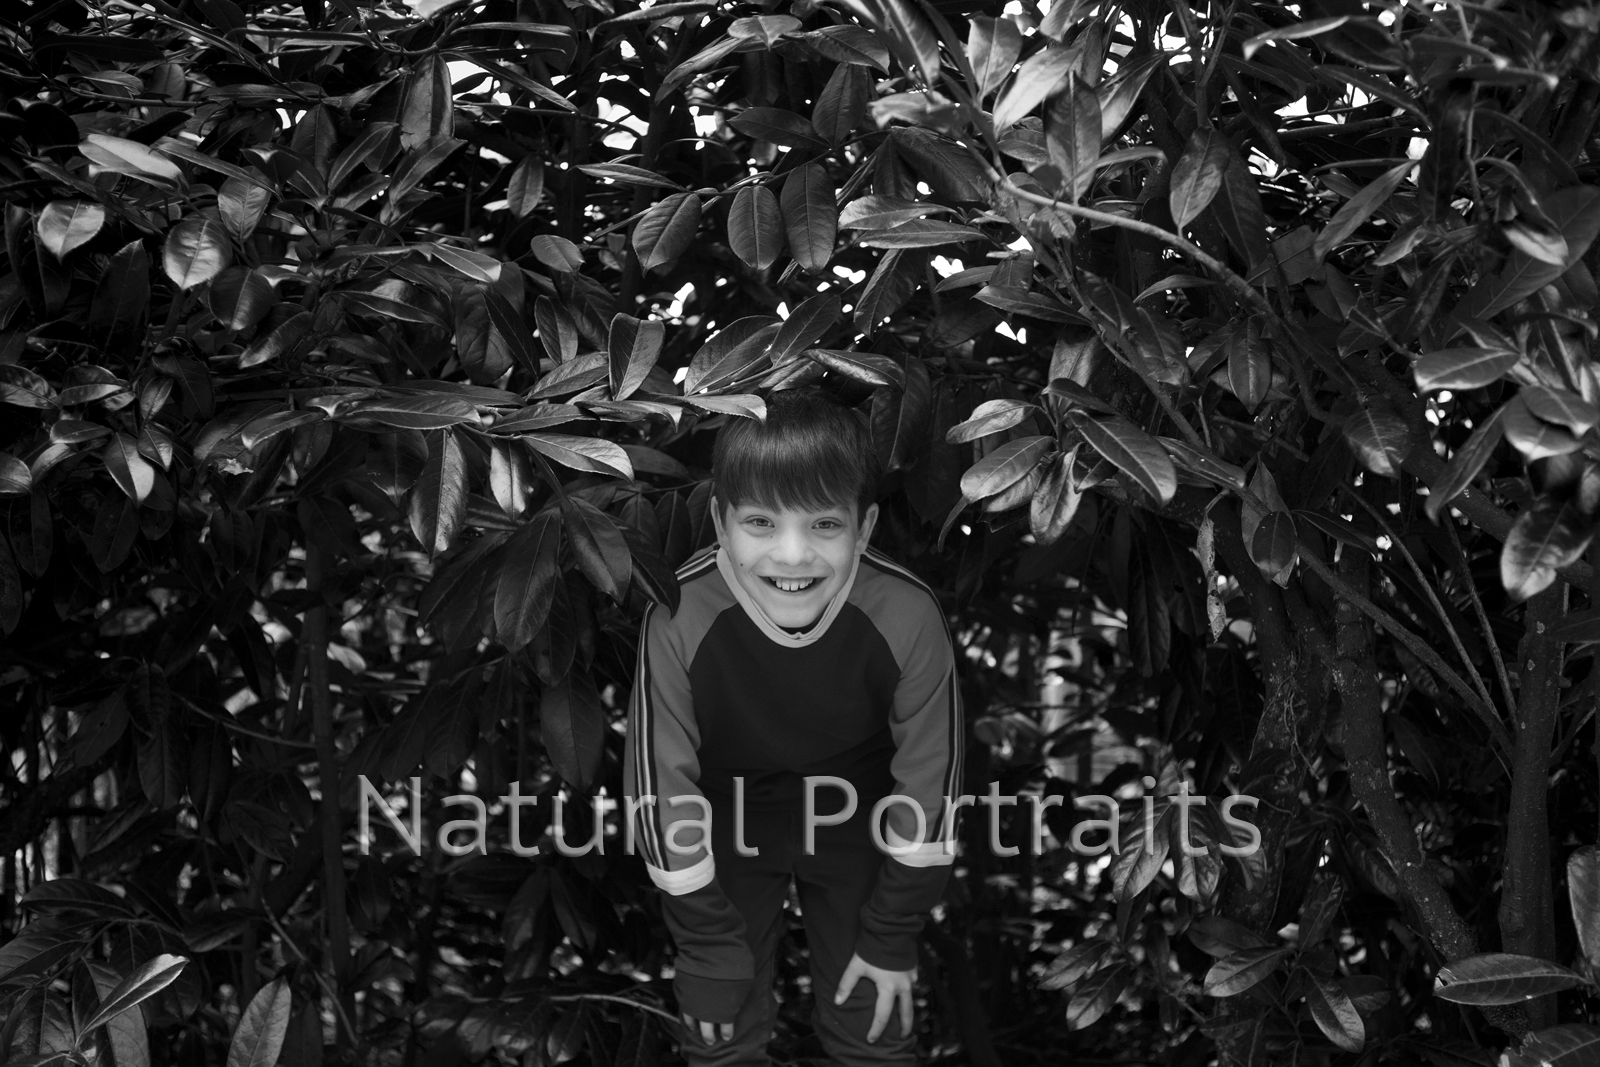 Playing hide and seek at Stourhead